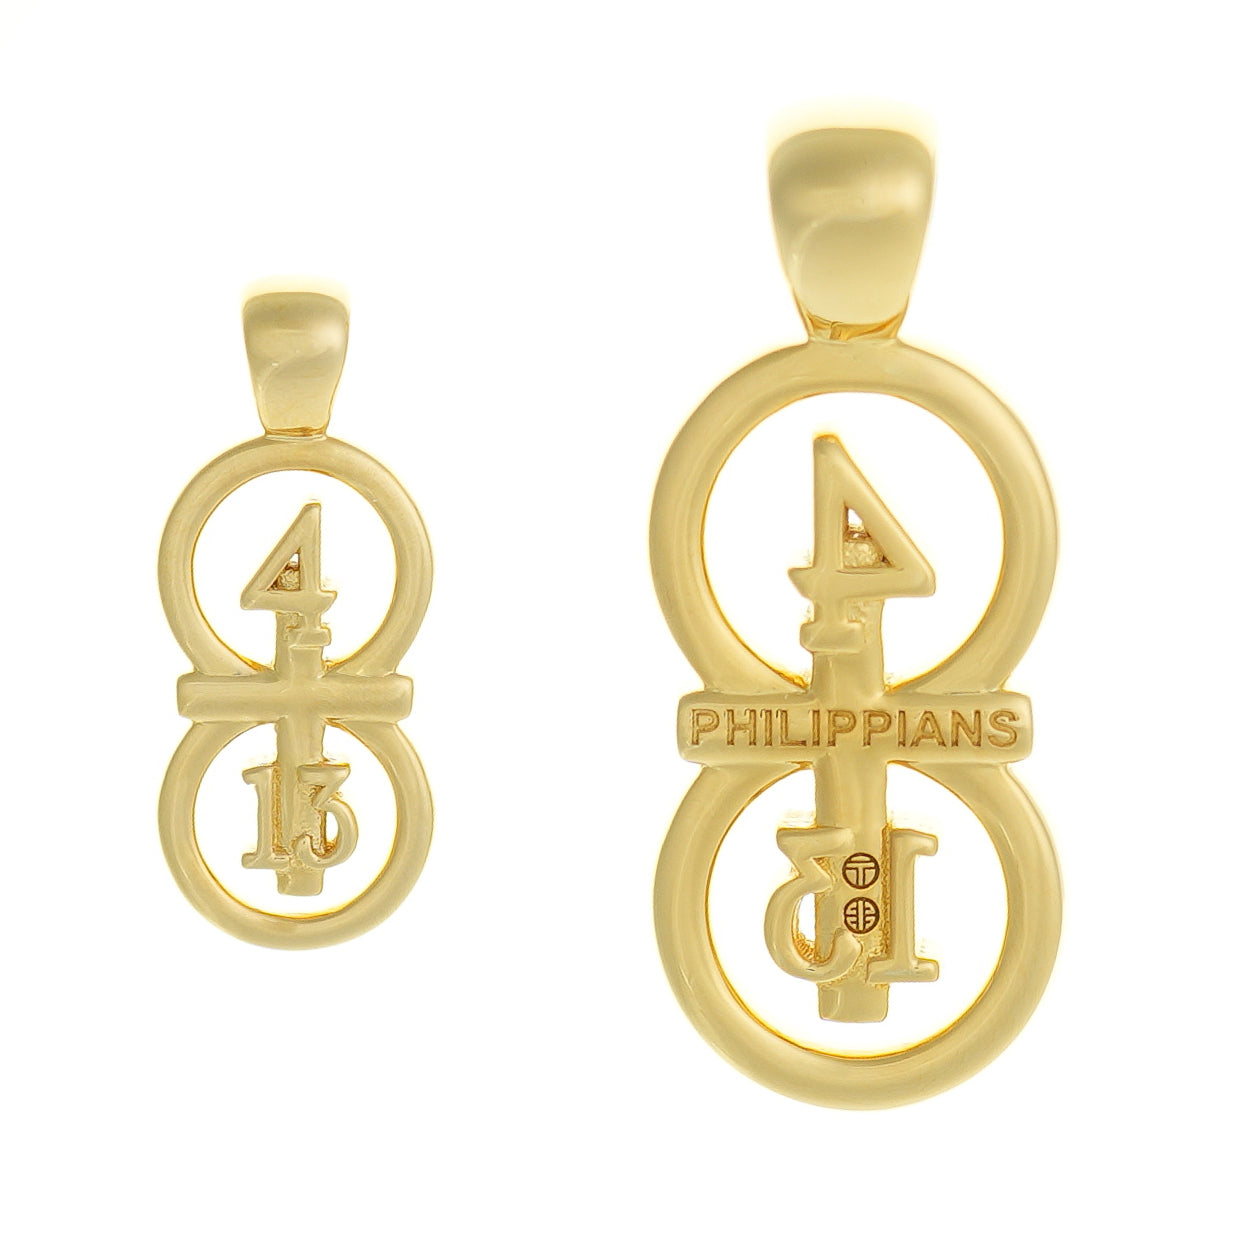 This image shows our small and large pendants side by side. This picture gives a good size comparance to each other. Our 29 and 11® pendant has the numbers 4 and 13 intertwined with the cross to represent Philippians 4:13 with the chapter word "Philippians" inscribed on the back.